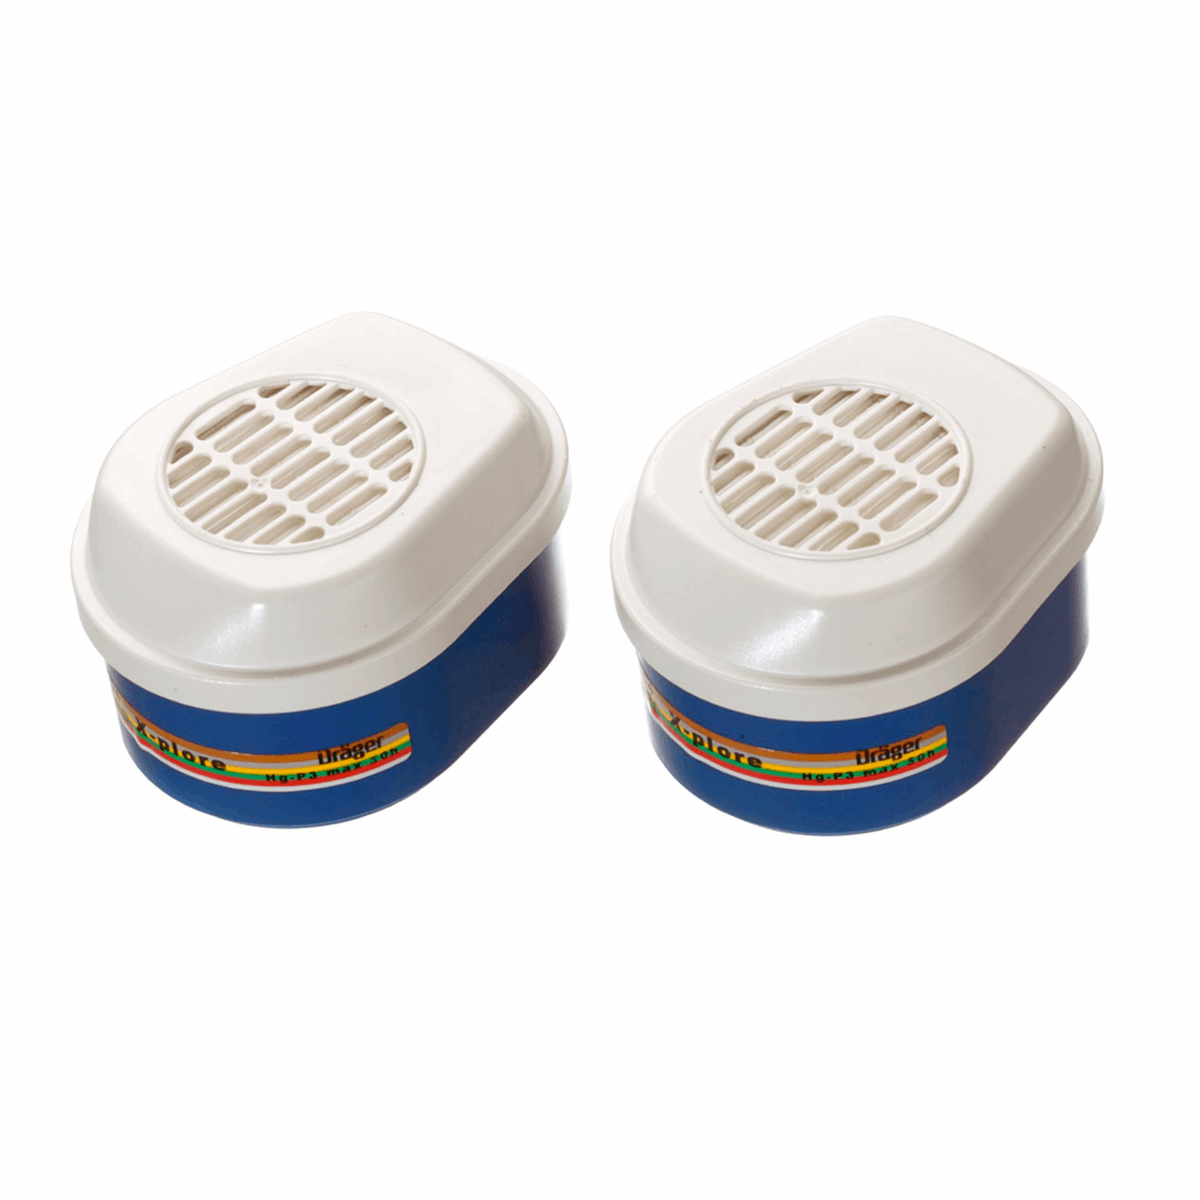 DRAEGER Filter Cartridge for use with Draeger X-plore Bayonet Half Masks 3300 &amp' 3500, Full Face Mask 5500 6738819